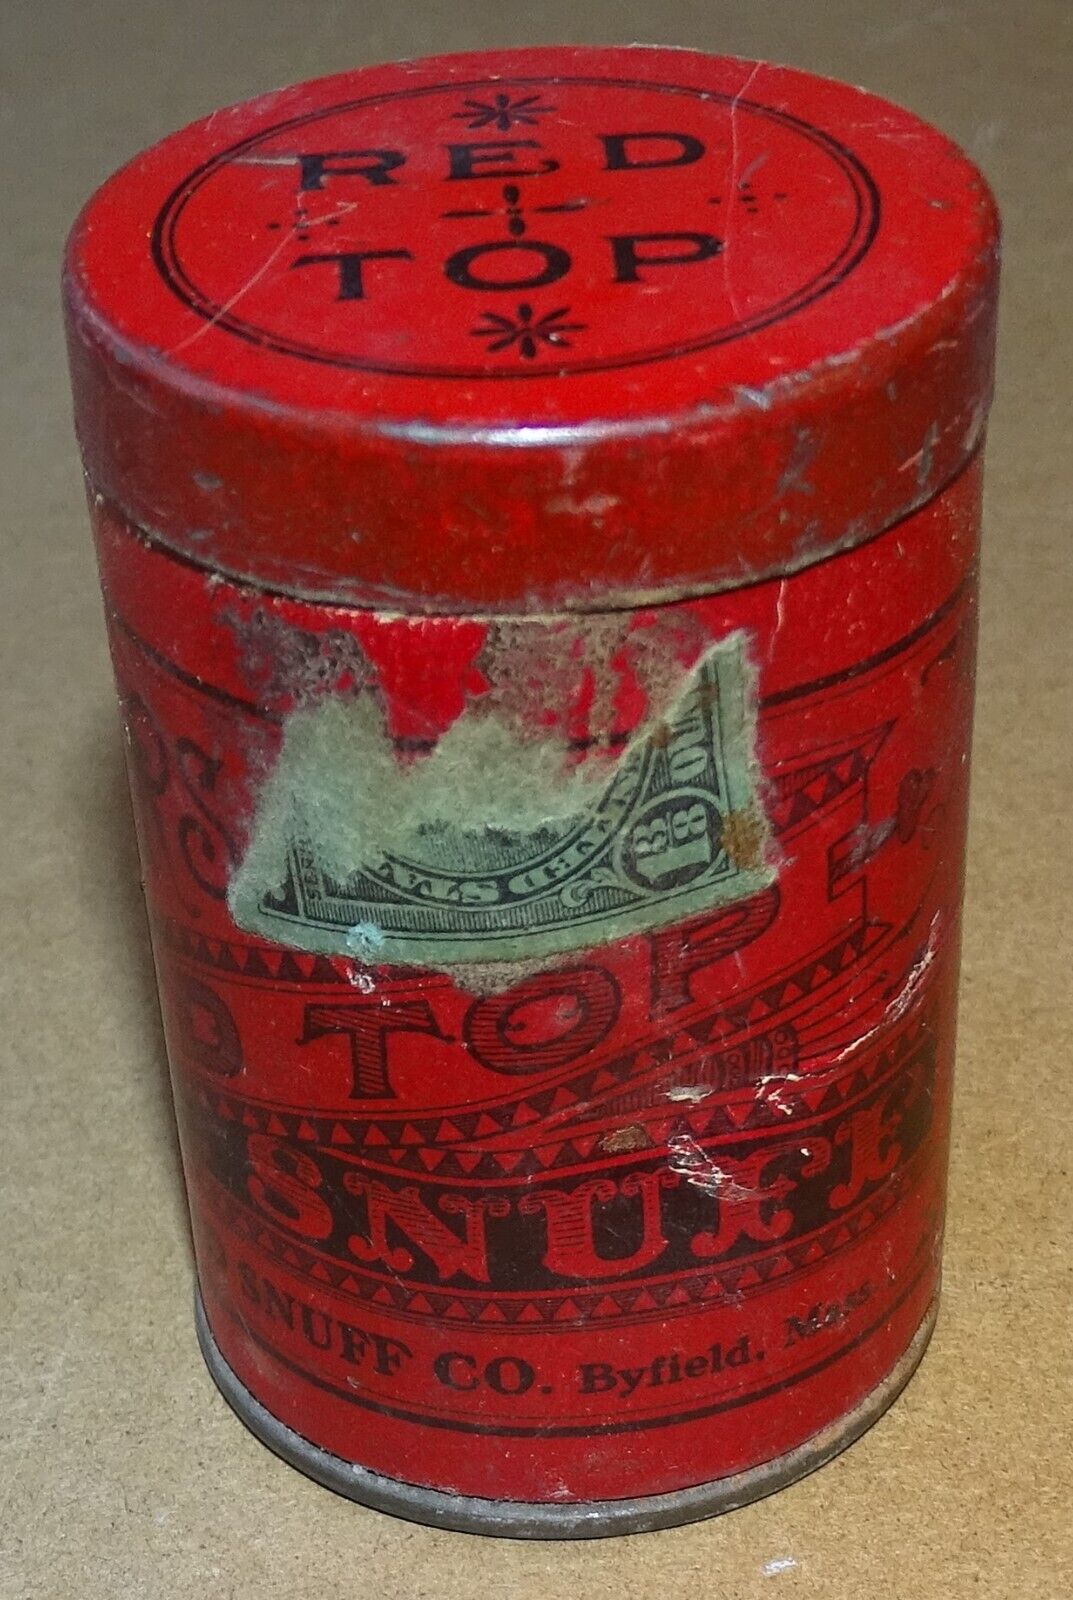 Antique Pearson's Red Top Snuff Can - Byfield, Mass.